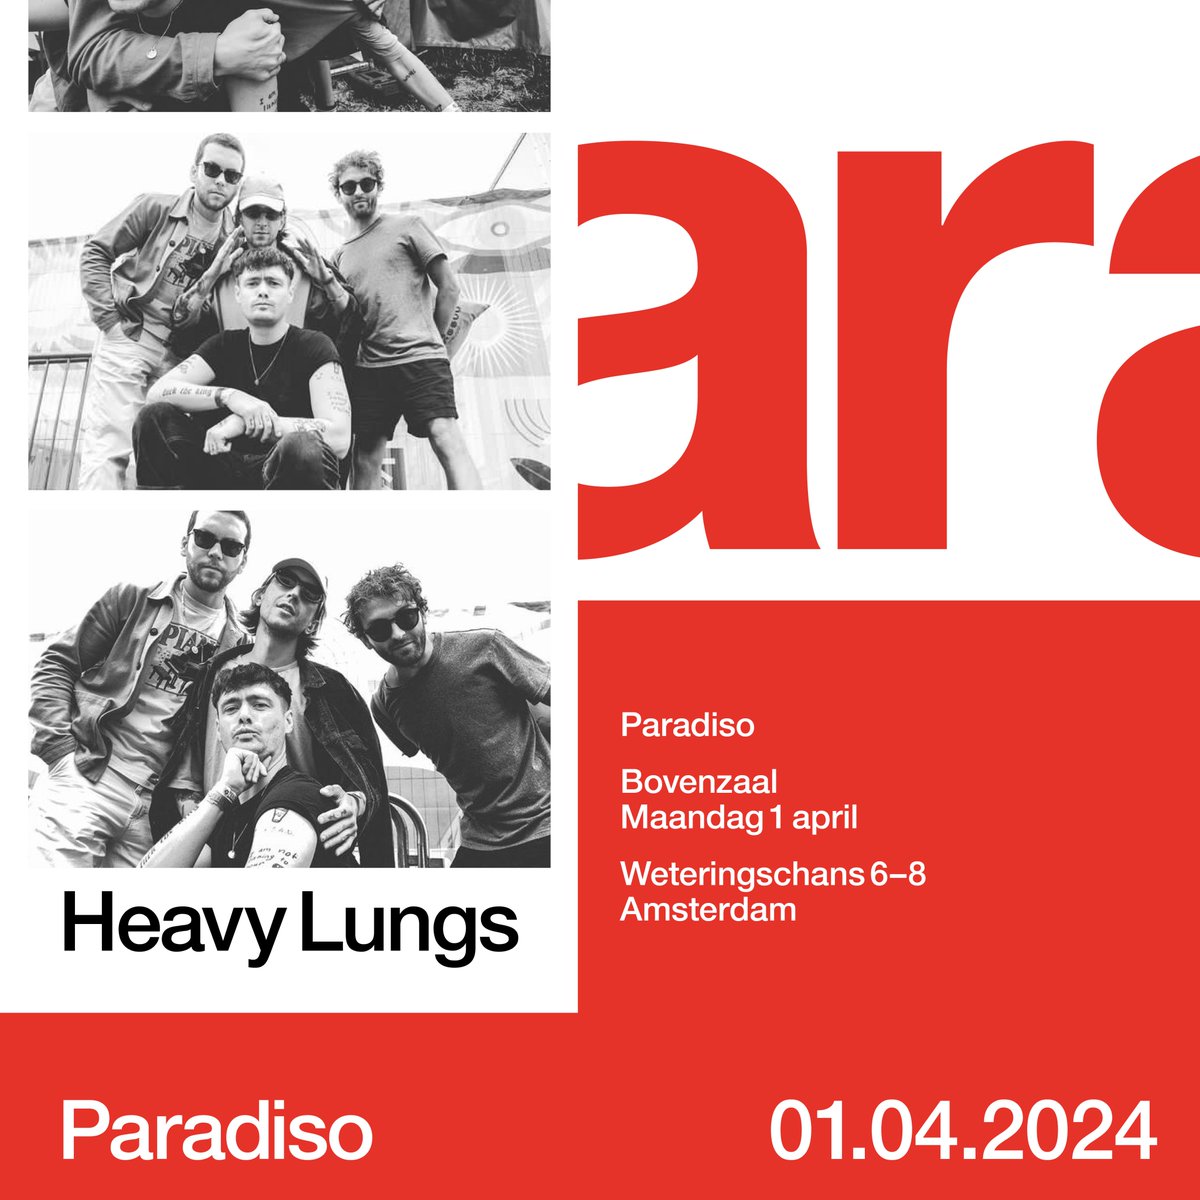 Wake up & smell the roses! Heavy Lungs are back in Amsterdam, rocking the foundations of the legendary @ParadisoAdam. It’s been too long (we counted how long it’s been & it’s depressing) but we are so fucking back. Tickets on sale Friday at 9am. Get yours with that Xmas Money😏🧮